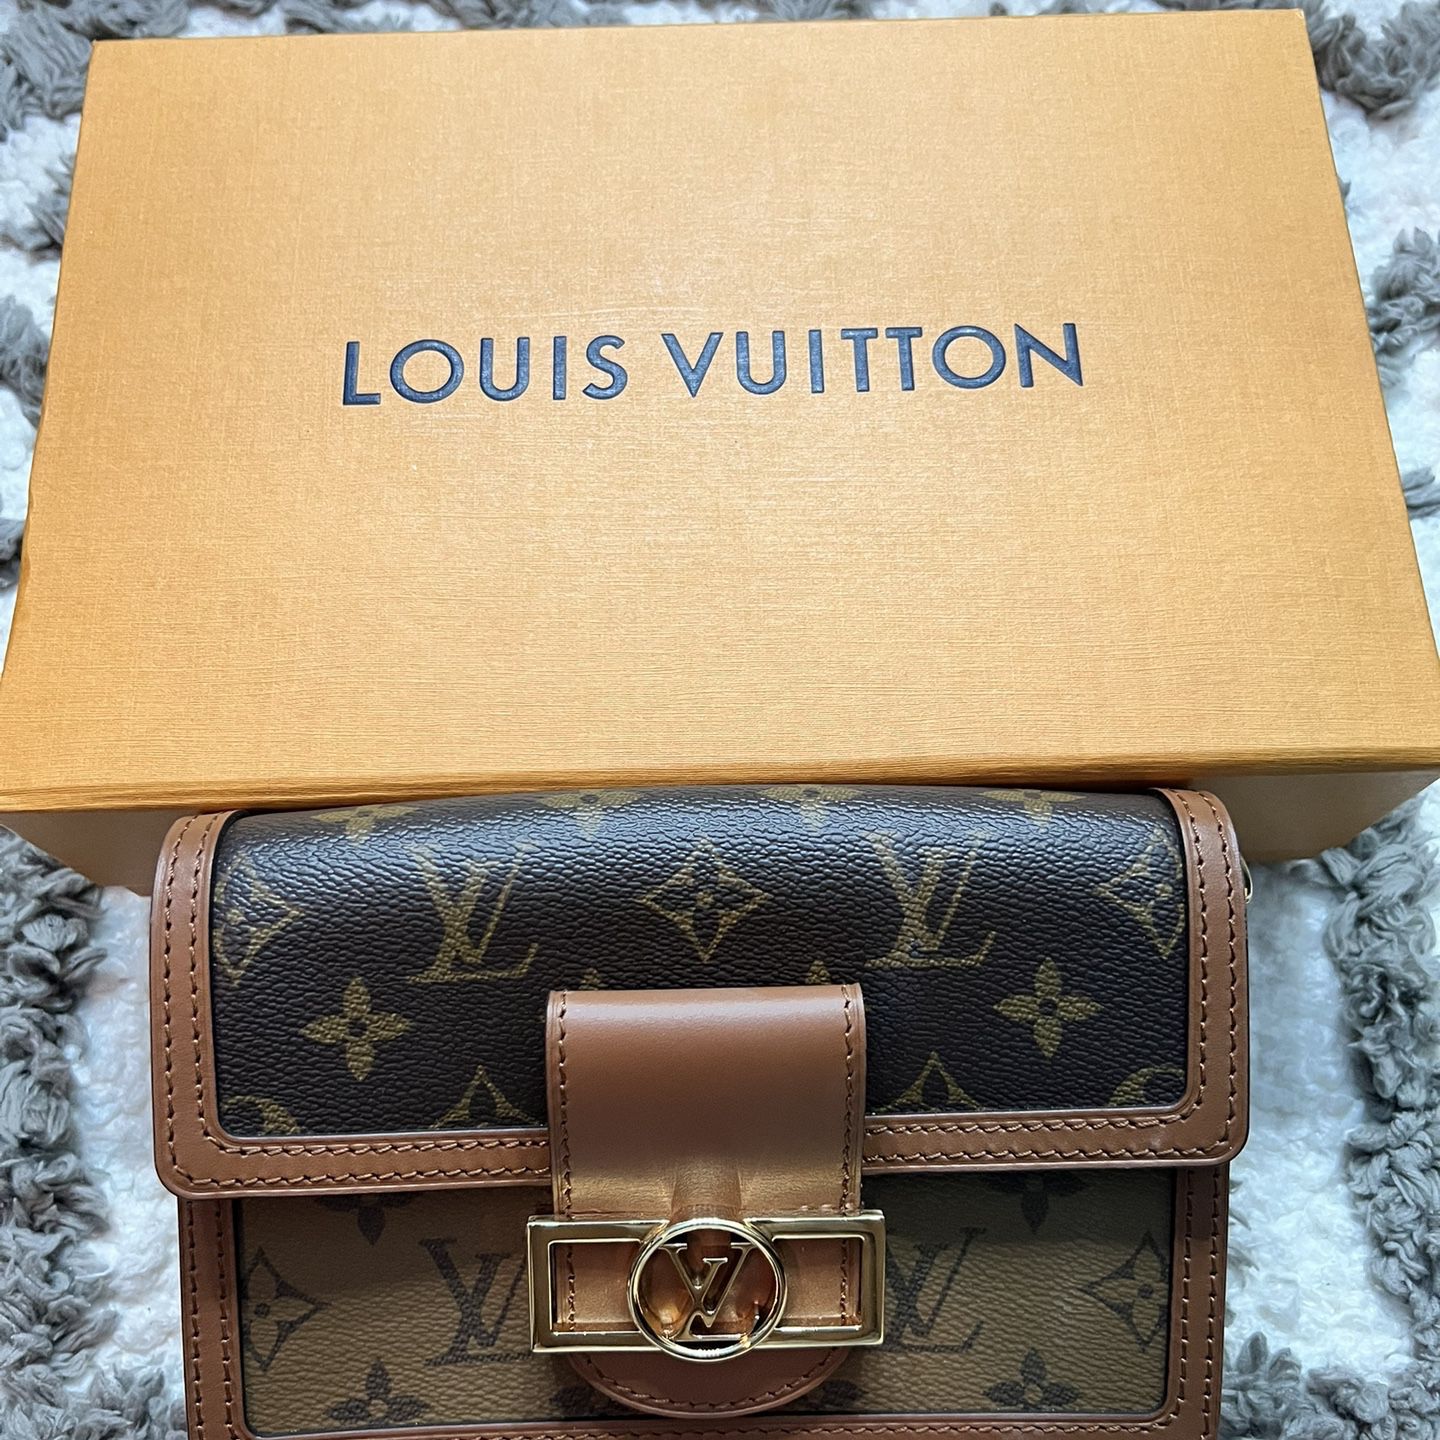 Louis Vuitton Dauphine Chain Wallet for Sale in St. Cloud, FL - OfferUp